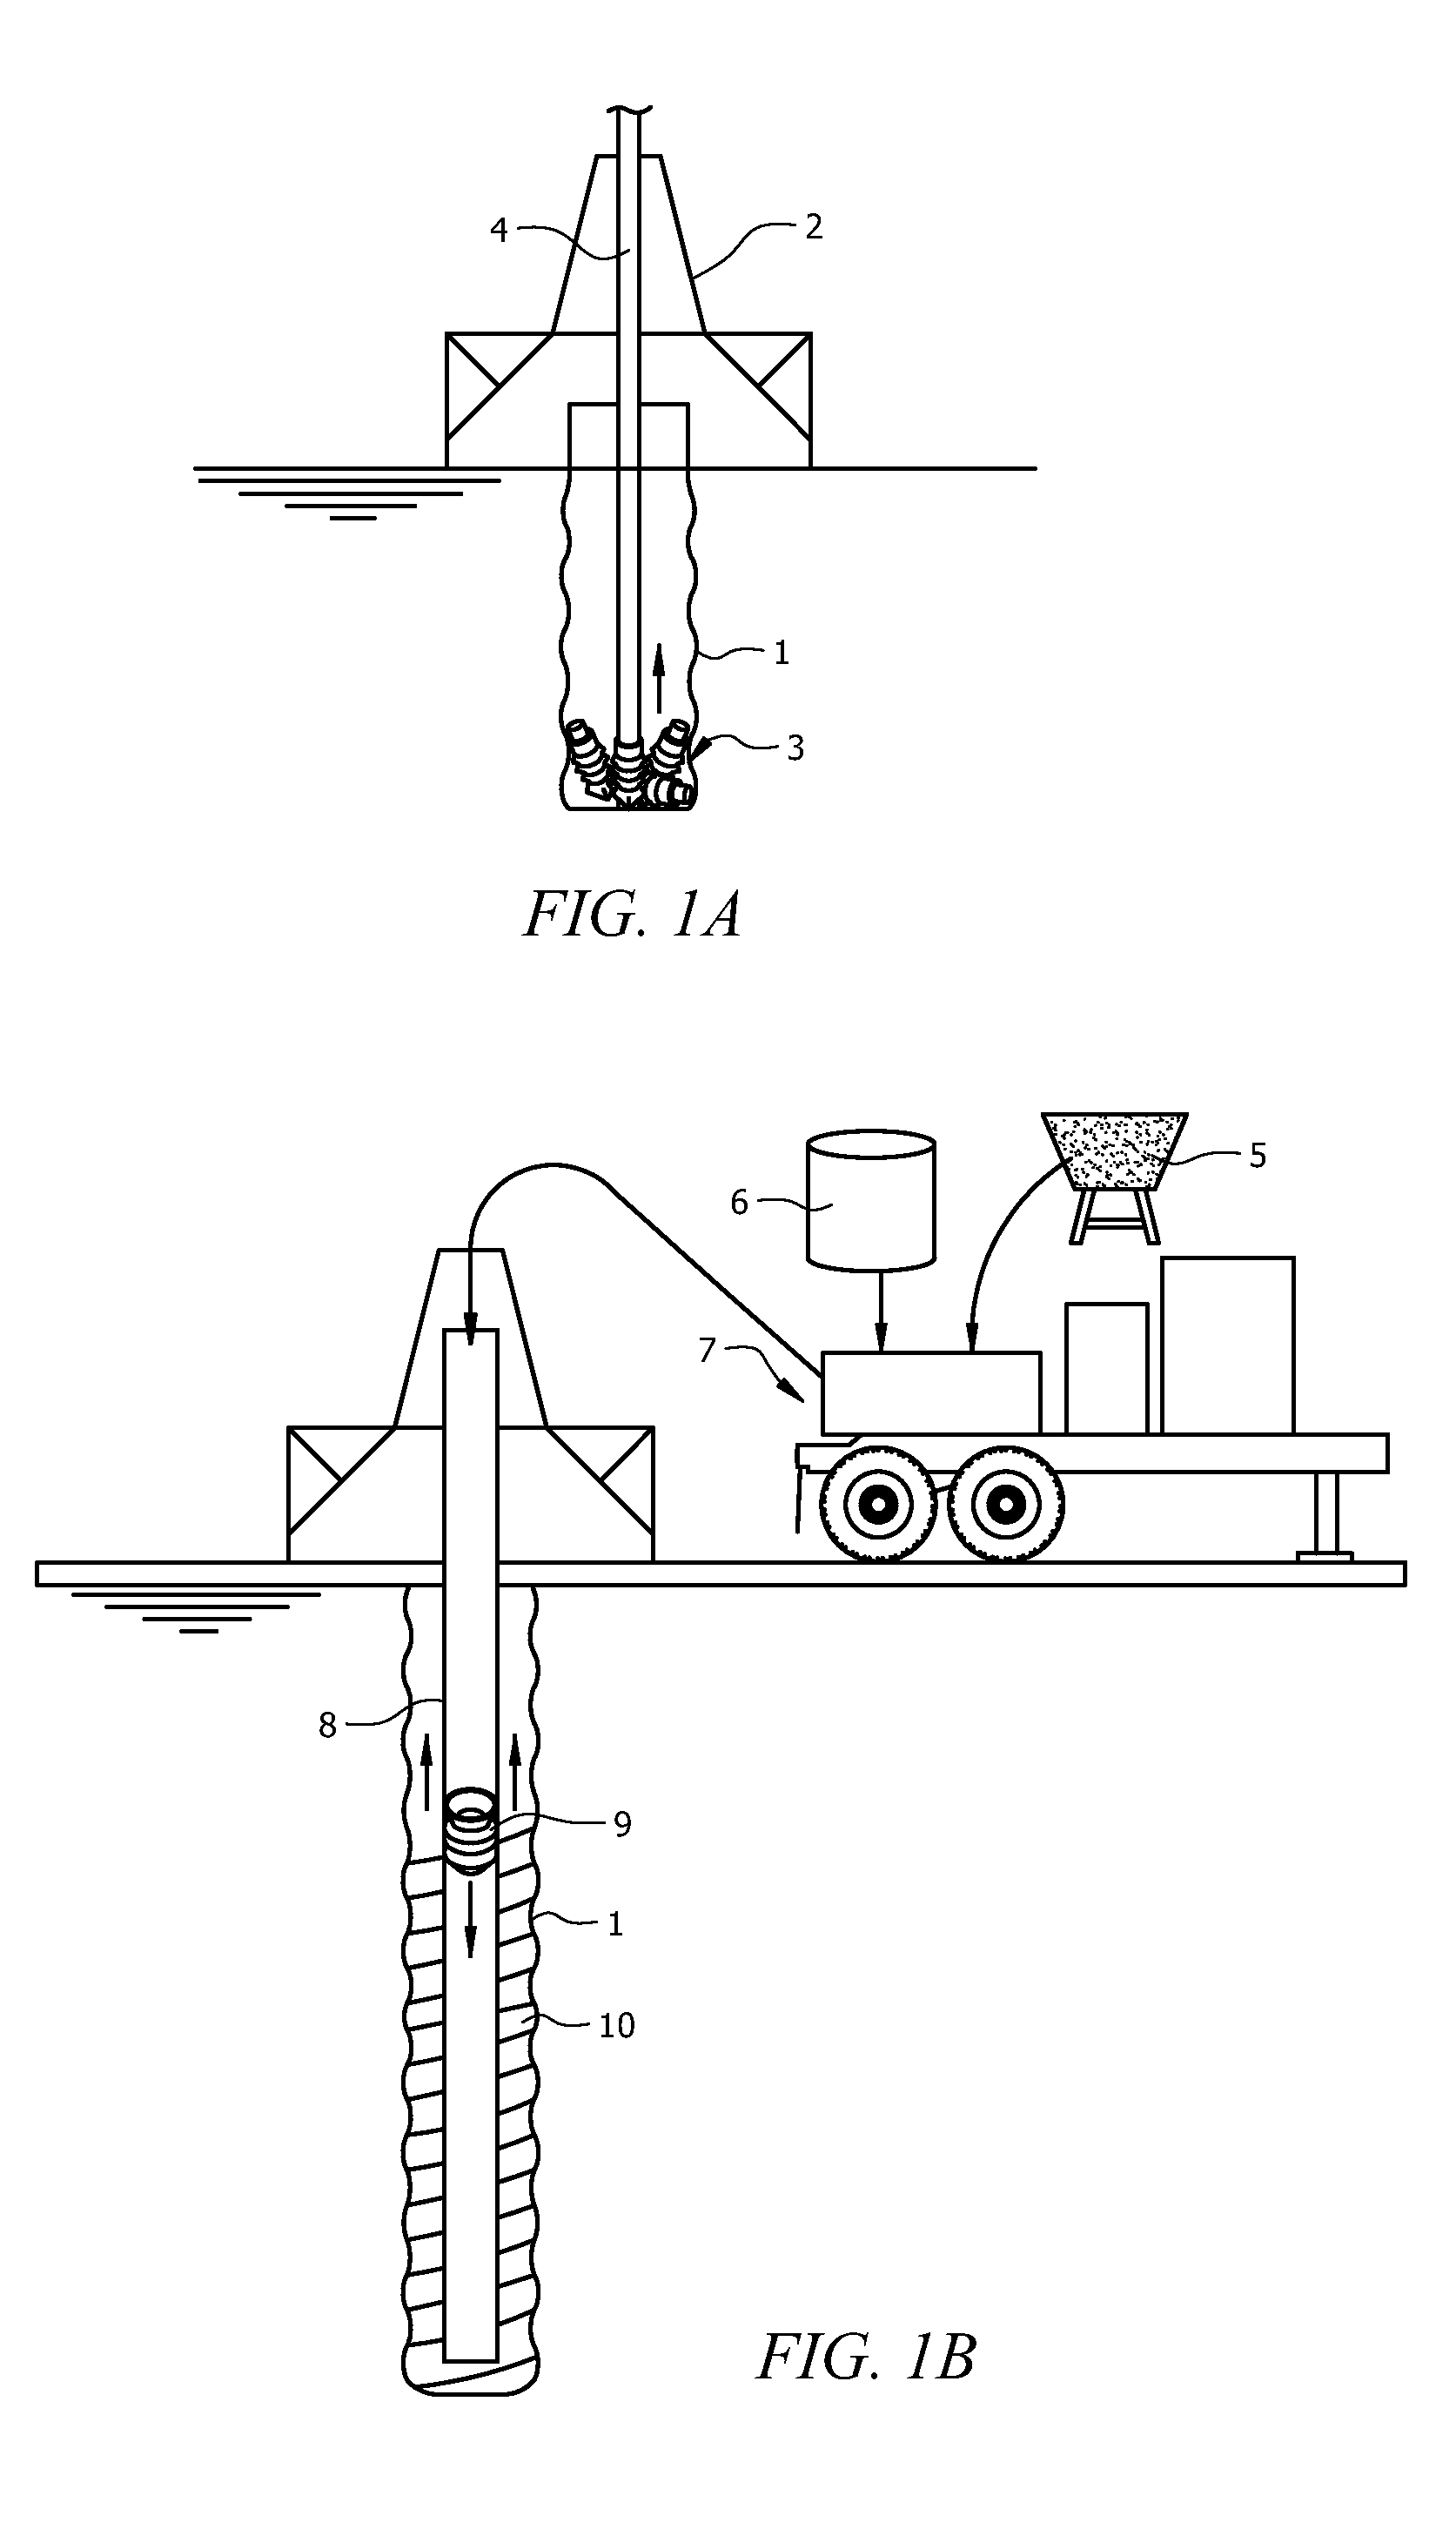 Submersible hydraulic artificial lift systems and methods of operating same